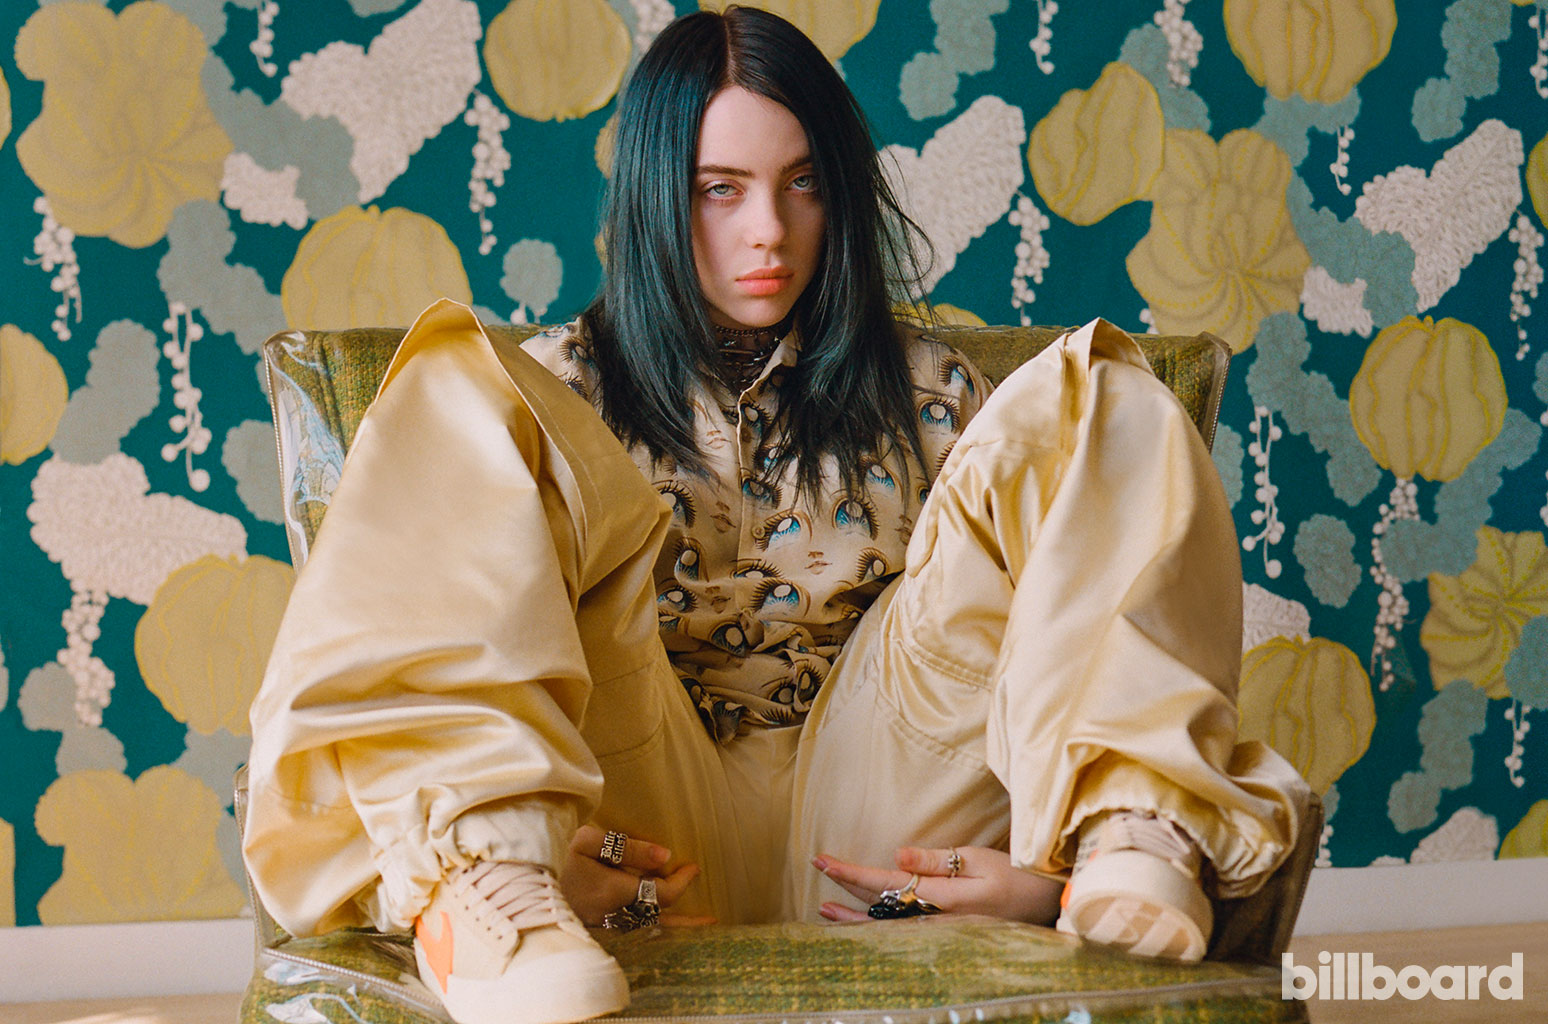 Enter for your chance to win a trip for two to Los Angeles for an intimate show by Billie Eilish. Billie Eilish Pirate Baird O'Connell is an American singer, songwriter, dancer, and model.